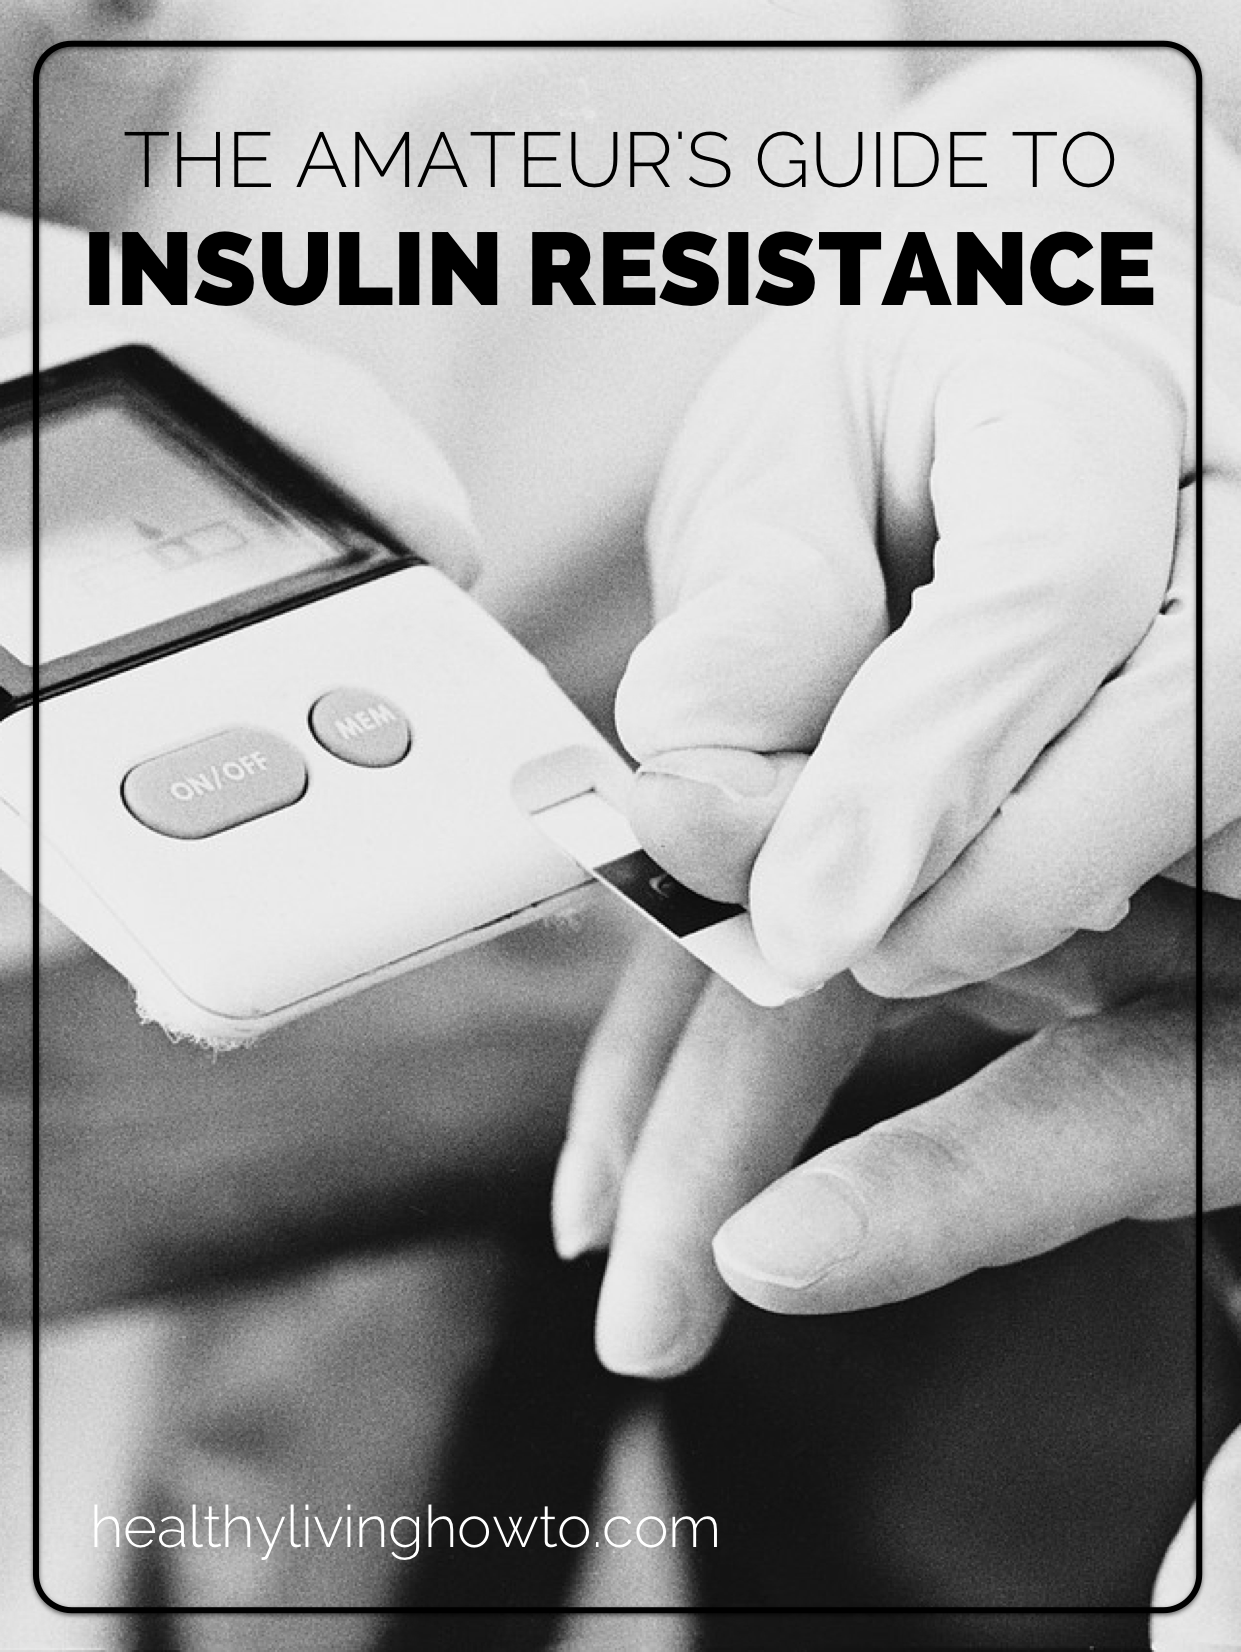 What are some diet tips for insulin-resistant people?